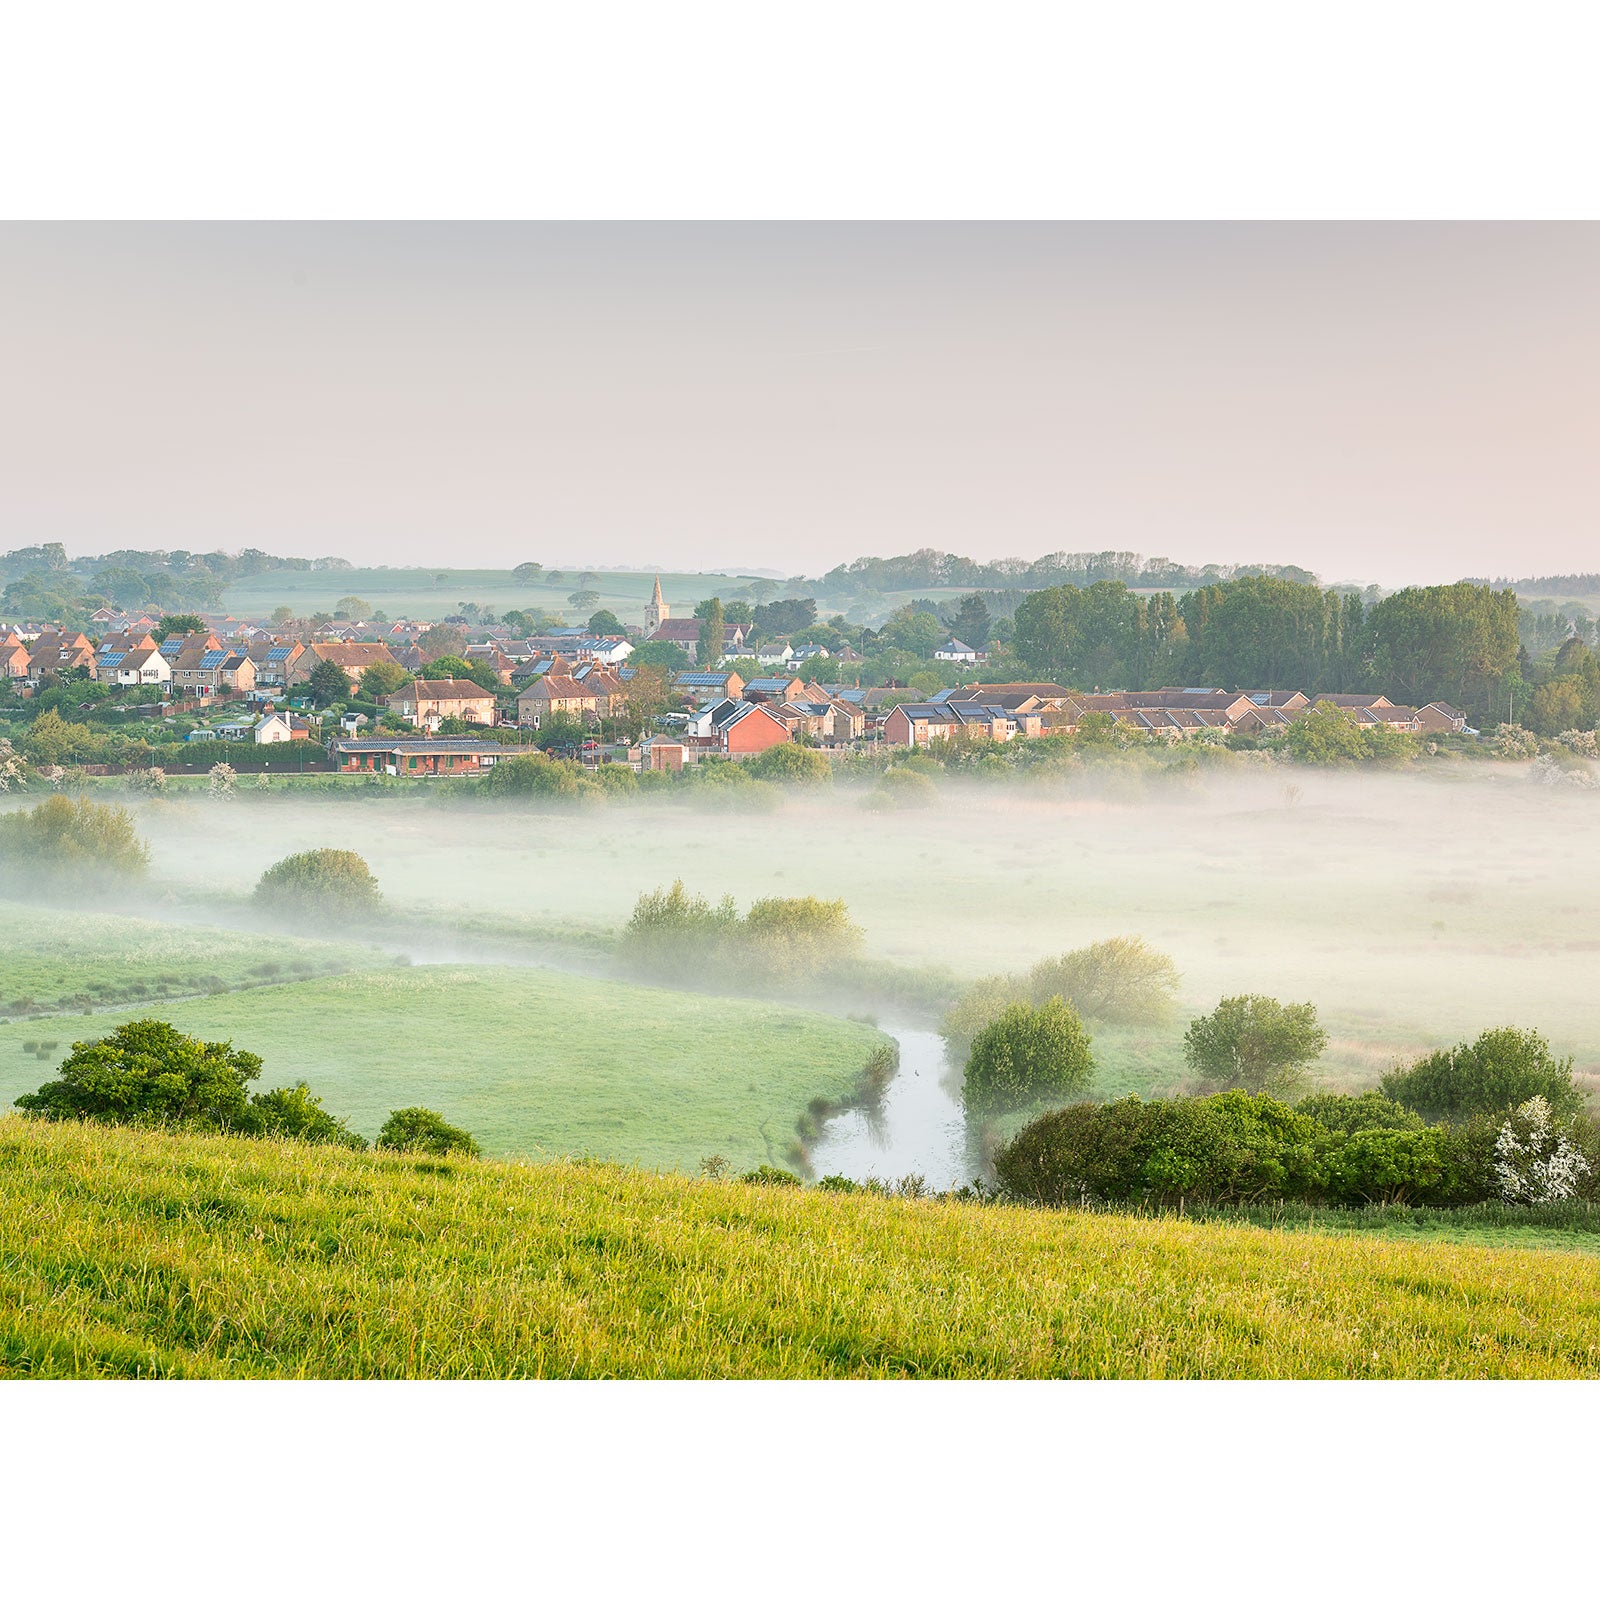 A tranquil morning scene of an isle village enveloped in mist with surrounding greenery captured by Brading by Available Light Photography.